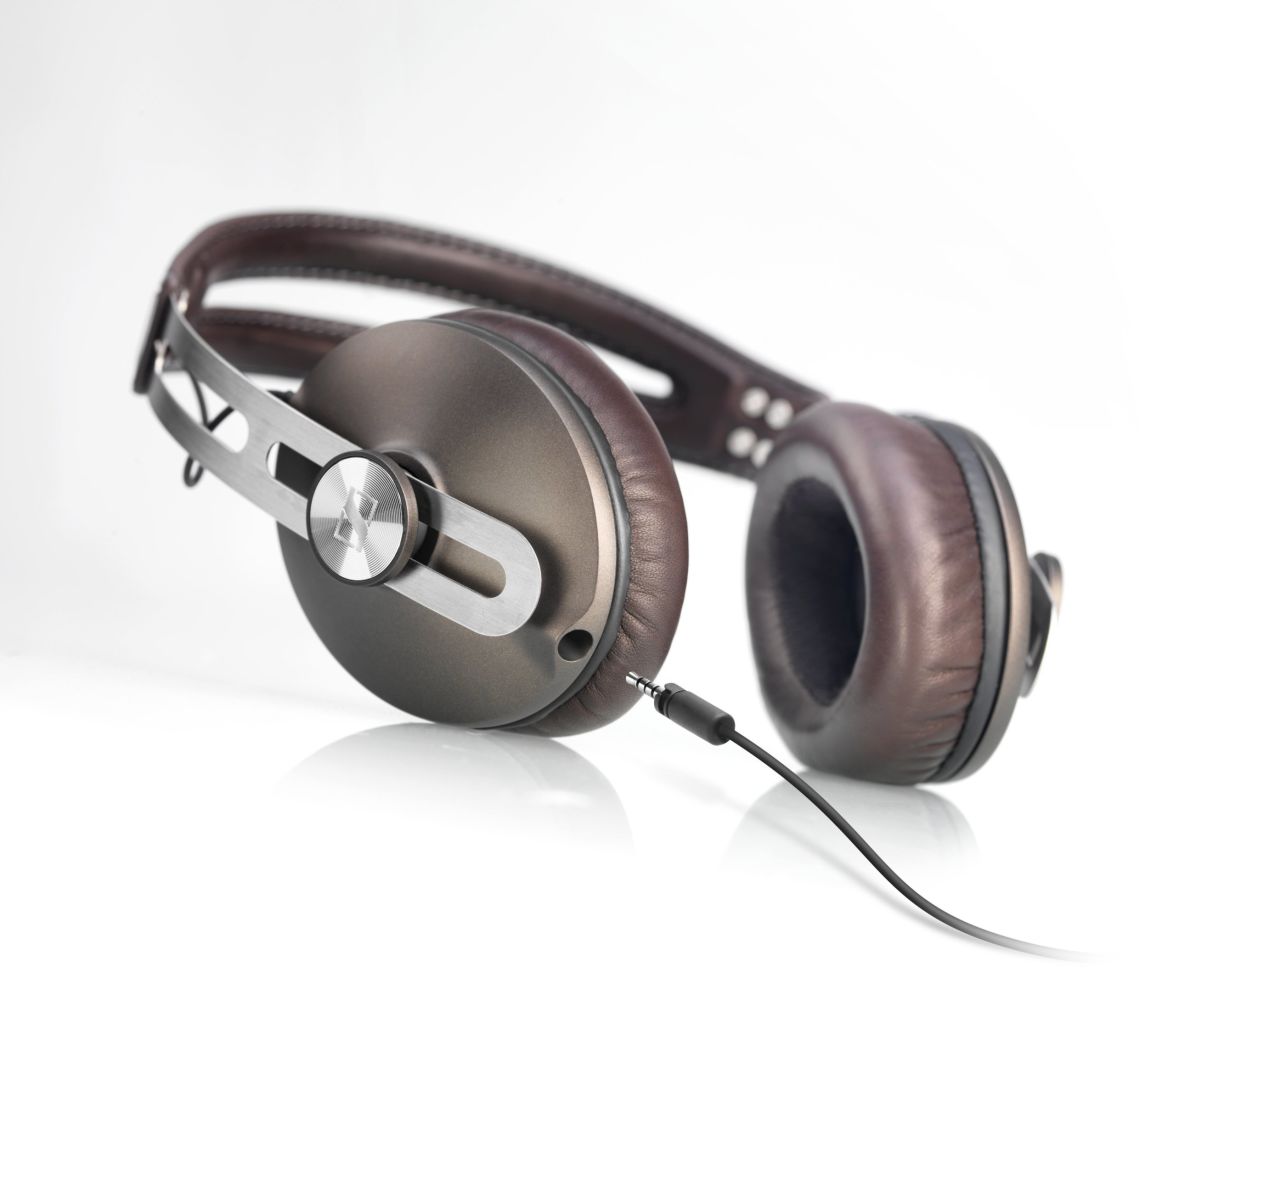 <strong>Sennheiser Momentum On-Ear.</strong> Headphone reviews are subjective. We know that. Nowadays, there's not only sound quality and price points to consider but stylishness, too. Sennheiser Momentum On-Ear headphones satisfy on a number of levels. They've gotten<a href="http://www.digitaltrends.com/headphone-reviews/sennheiser-momentum-on-ear-review/" target="_blank" target="_blank"> great reviews</a>, look terrific and have a price competitive with those designer cans you see on the street. Worth a listen. ($229.95)<br />